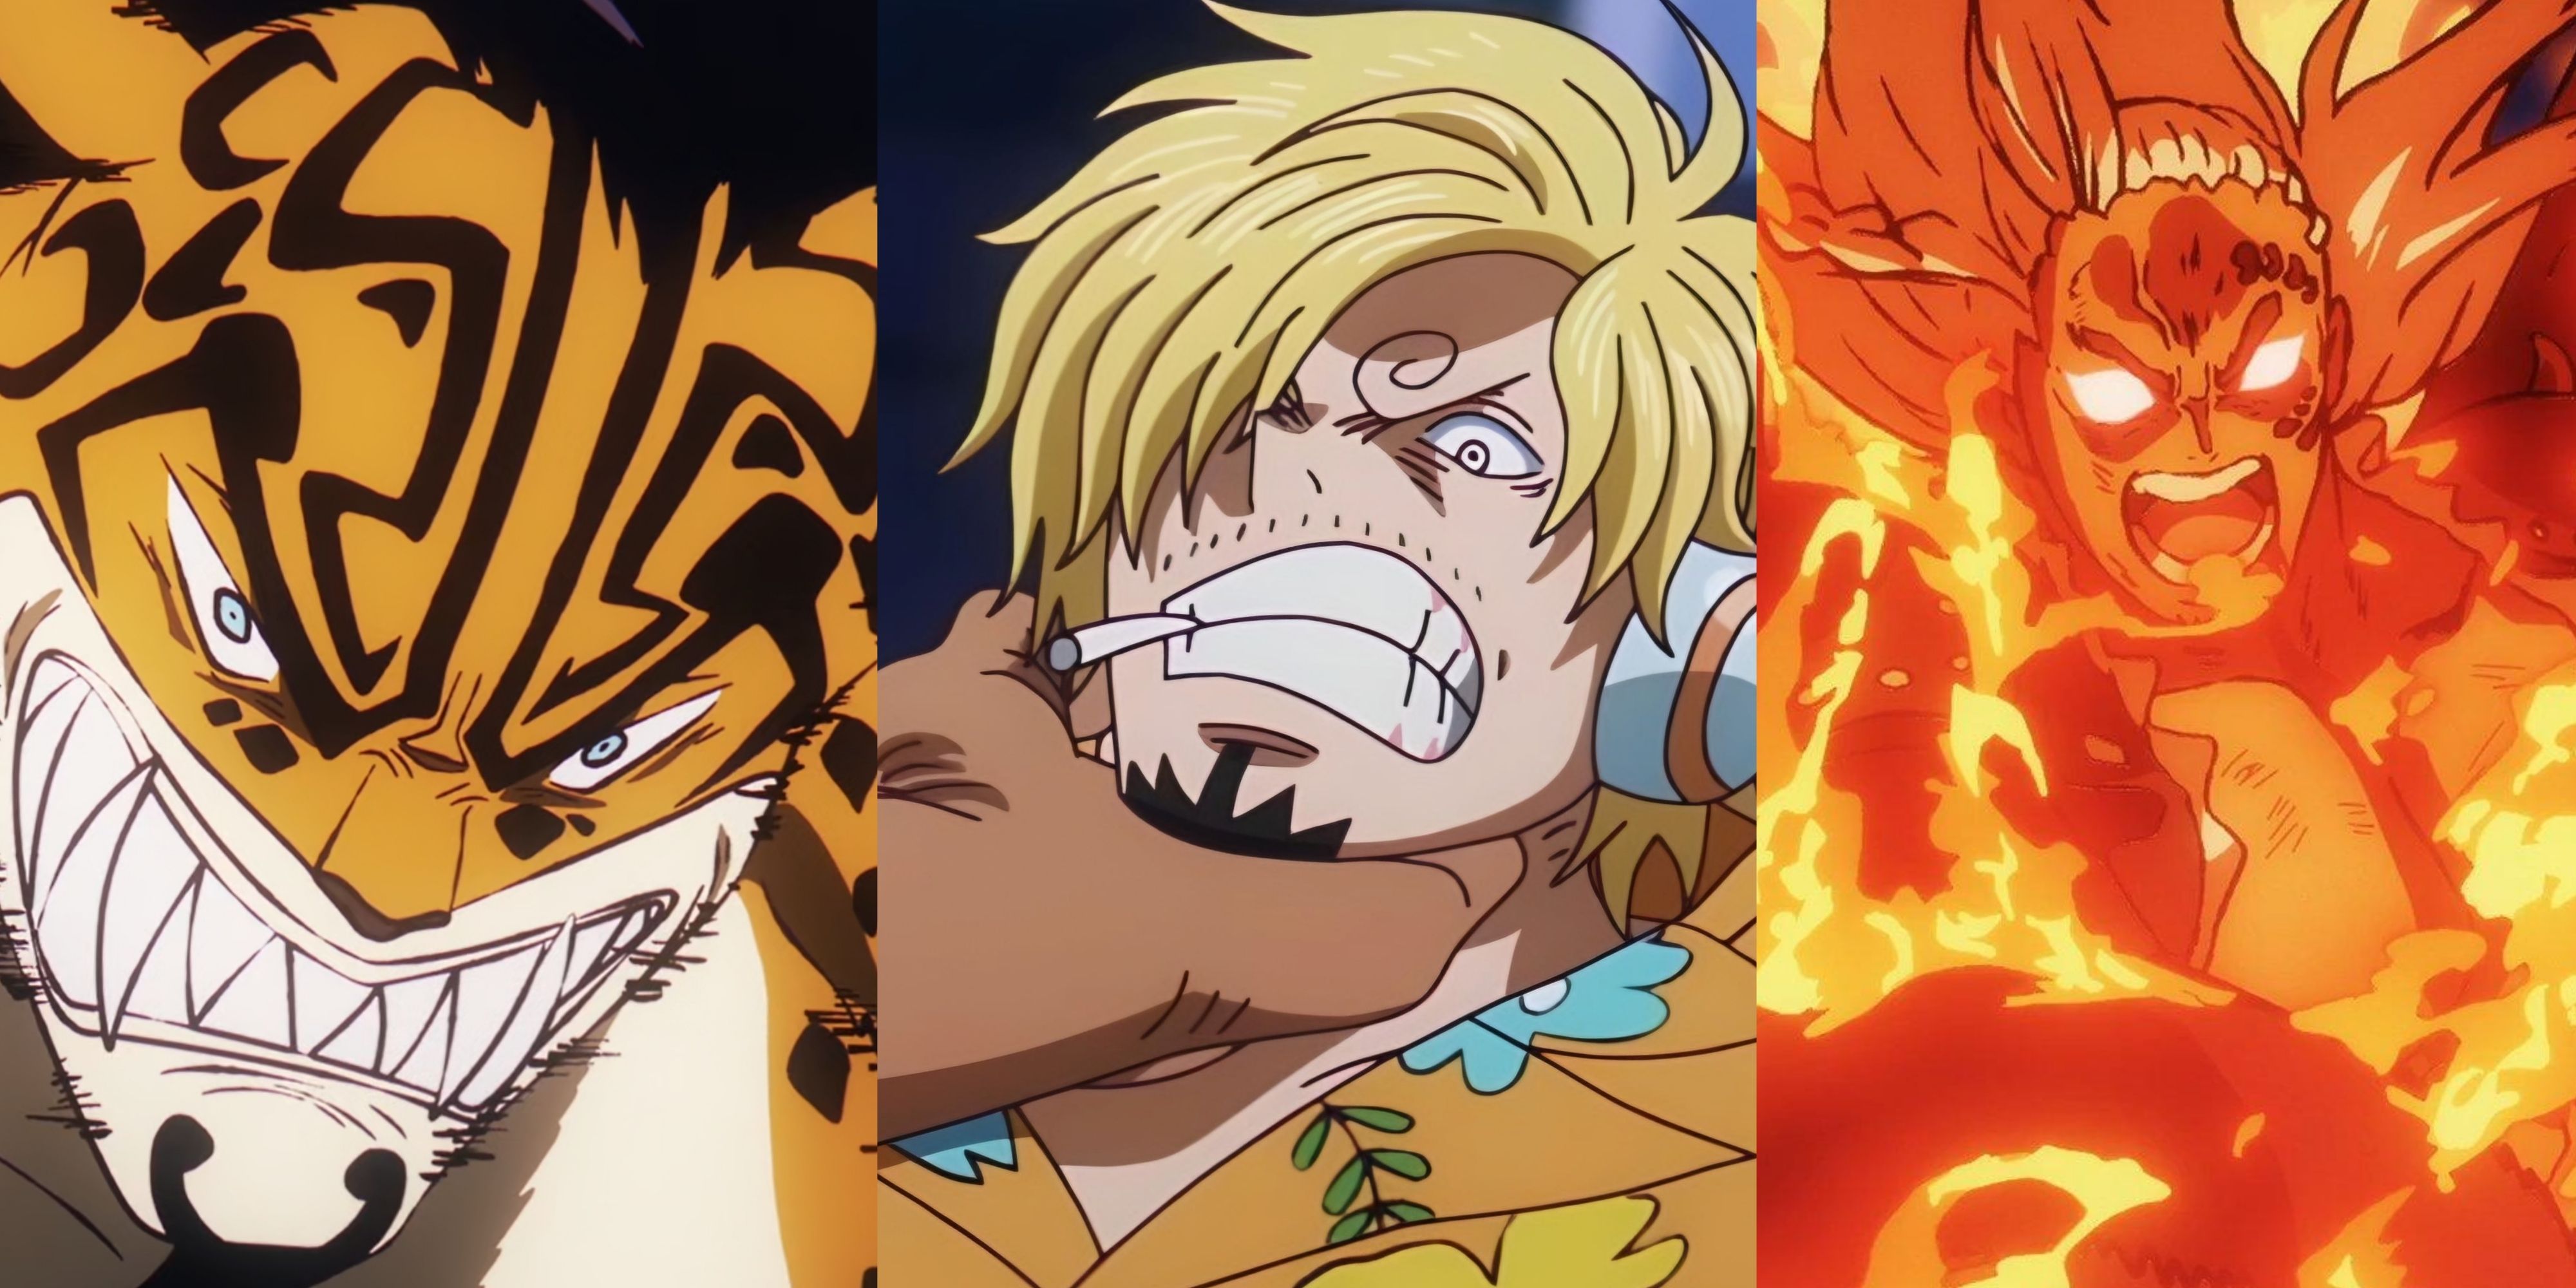 Featured One Piece Characters That Zoro Can Beat But Sanji Can't